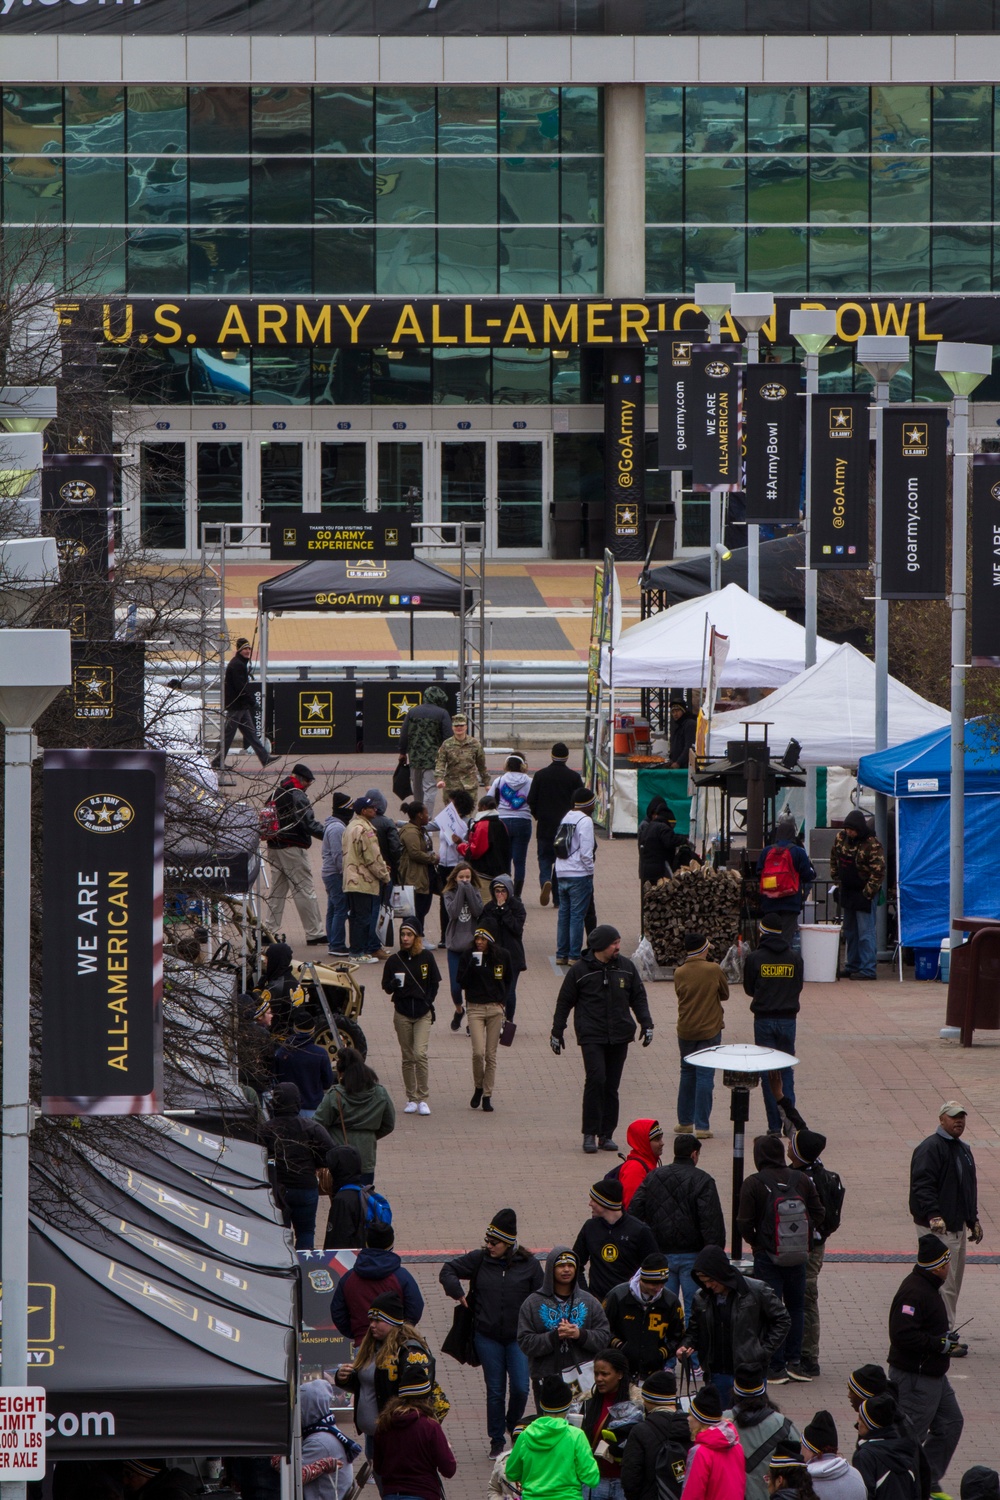 Go Army Experience connects America’s people with America’s Army